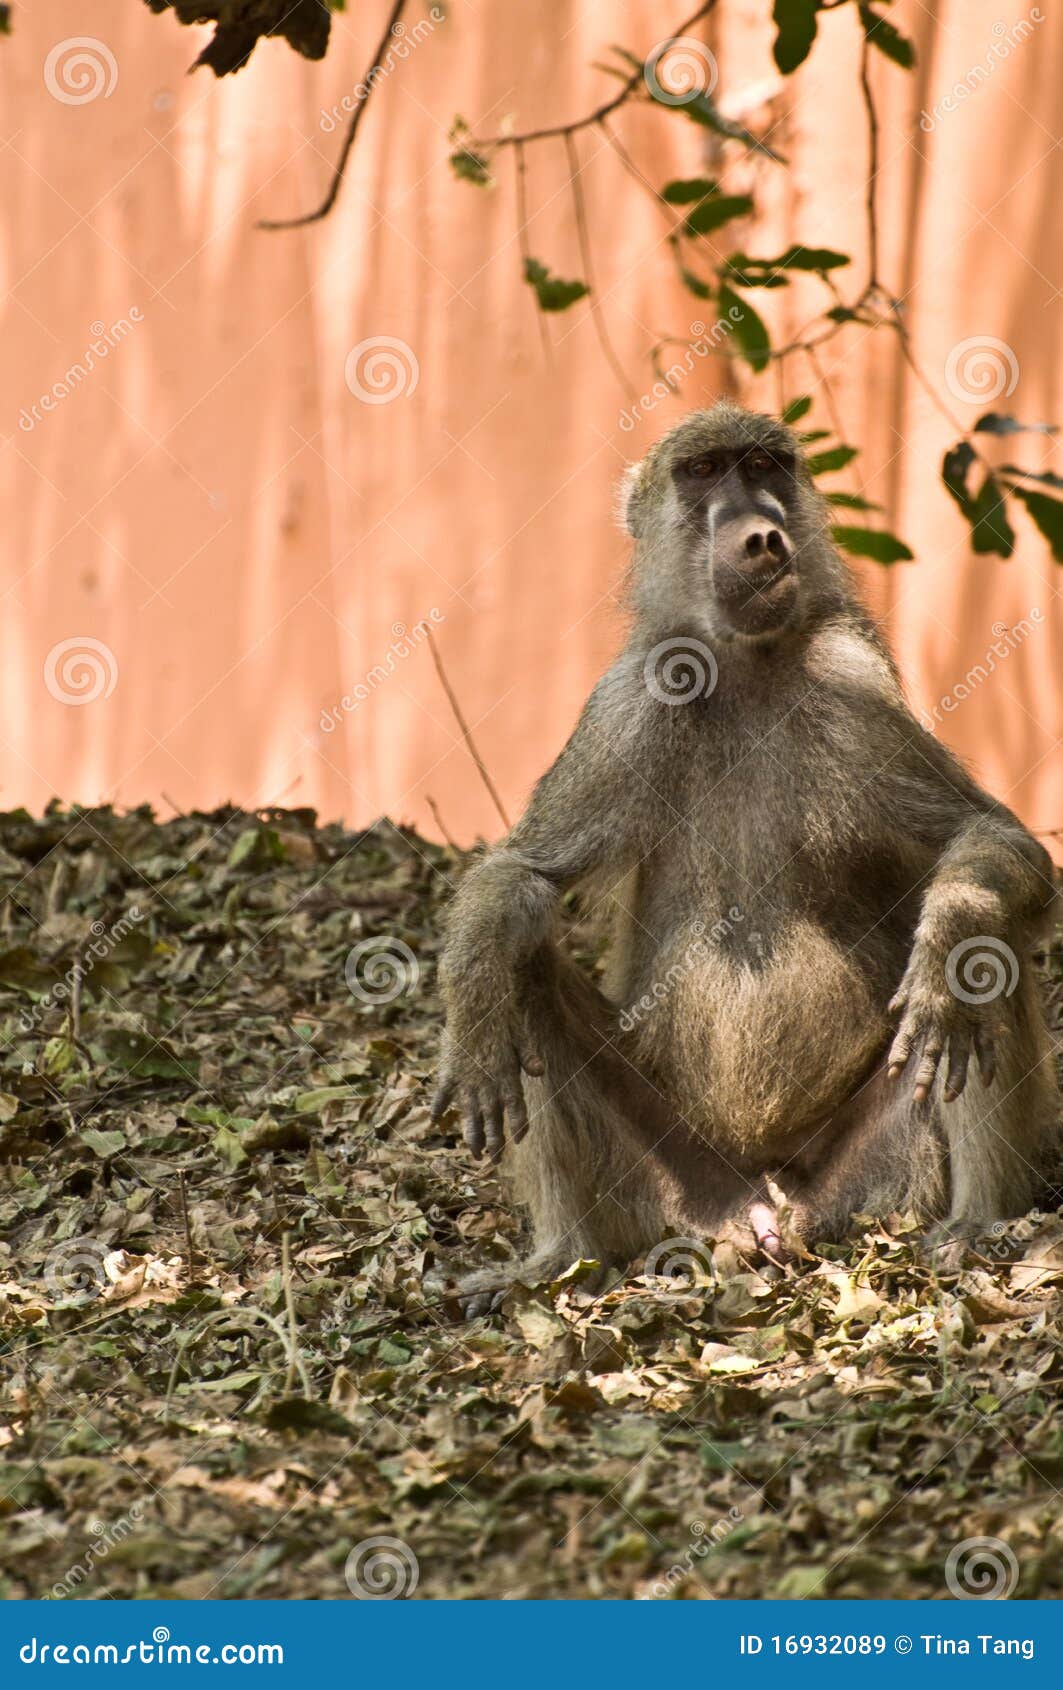 Cute Monkey Making A Funny Face Royalty Free Stock Images - Image: 16932089